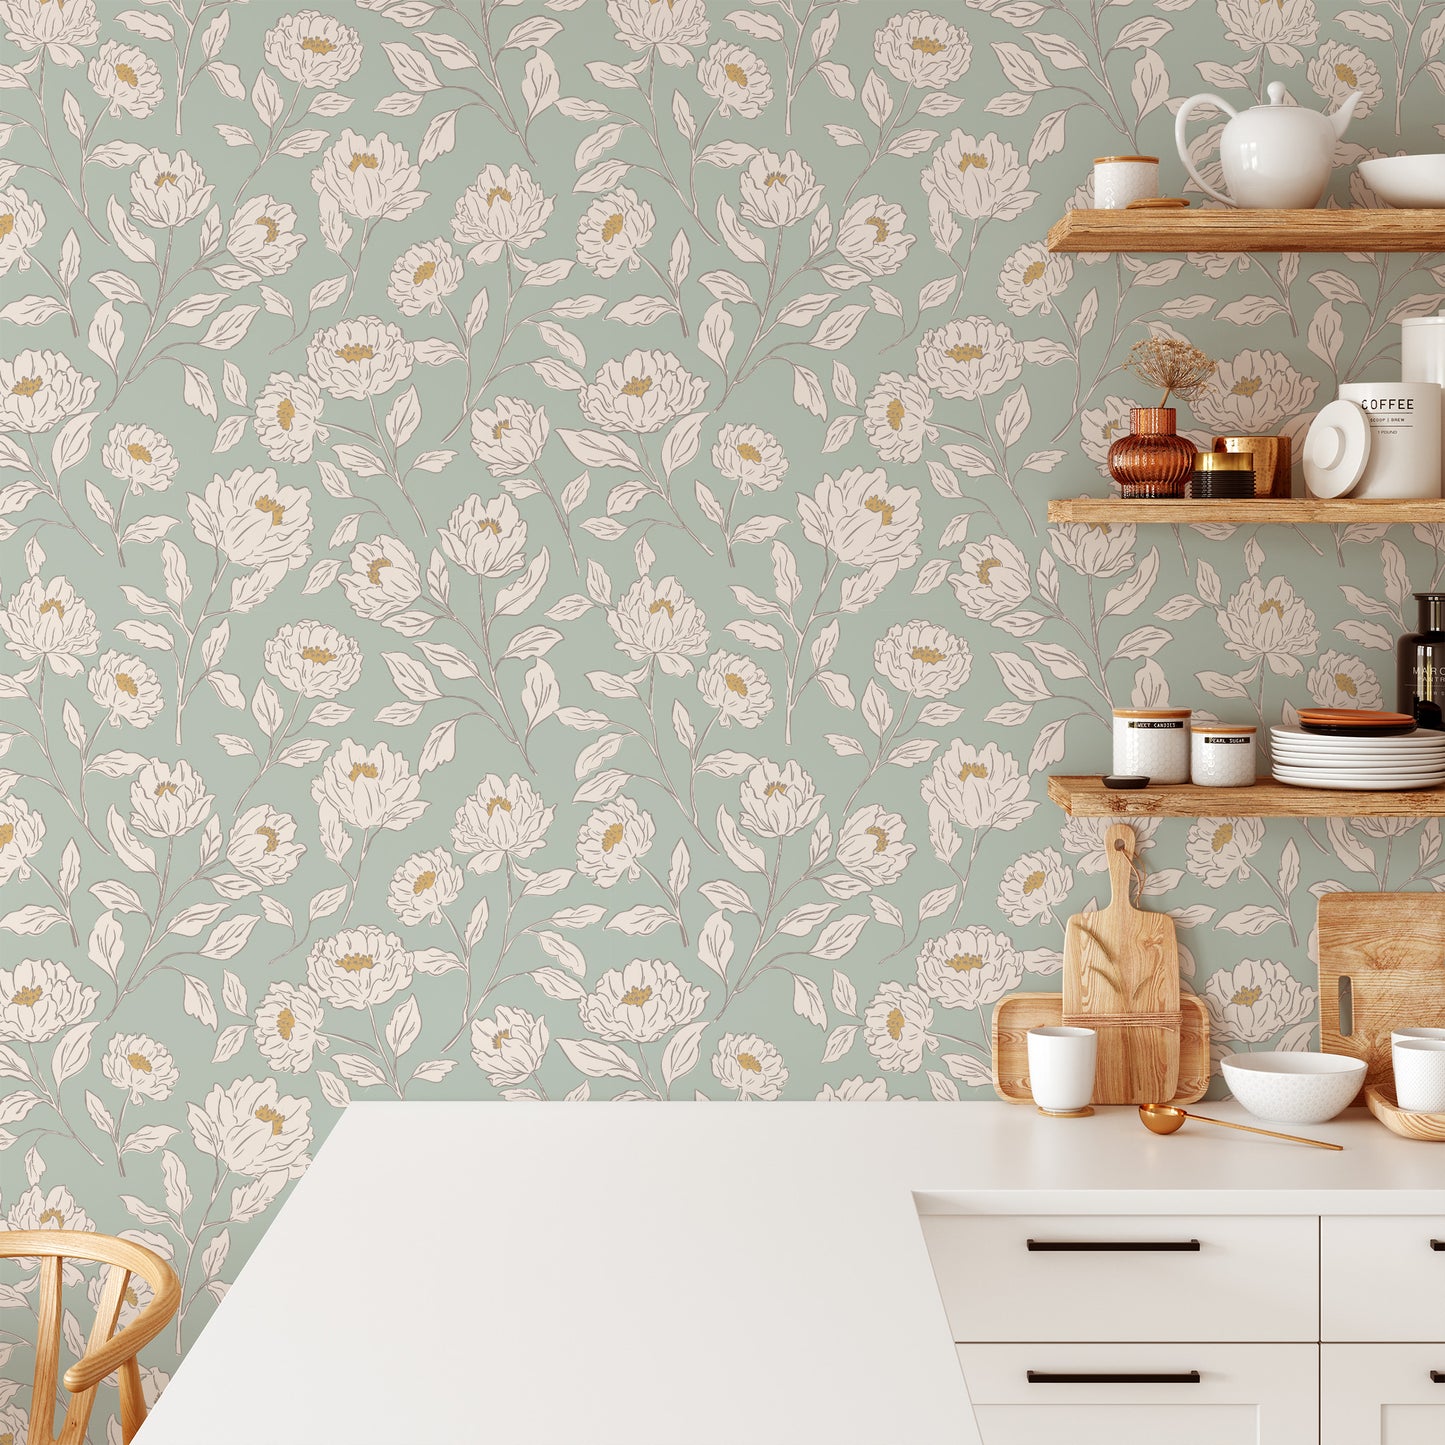 Kitchen Pantry featuring Floral Toile Peel and Stick, Removable Wallpaper in Sage